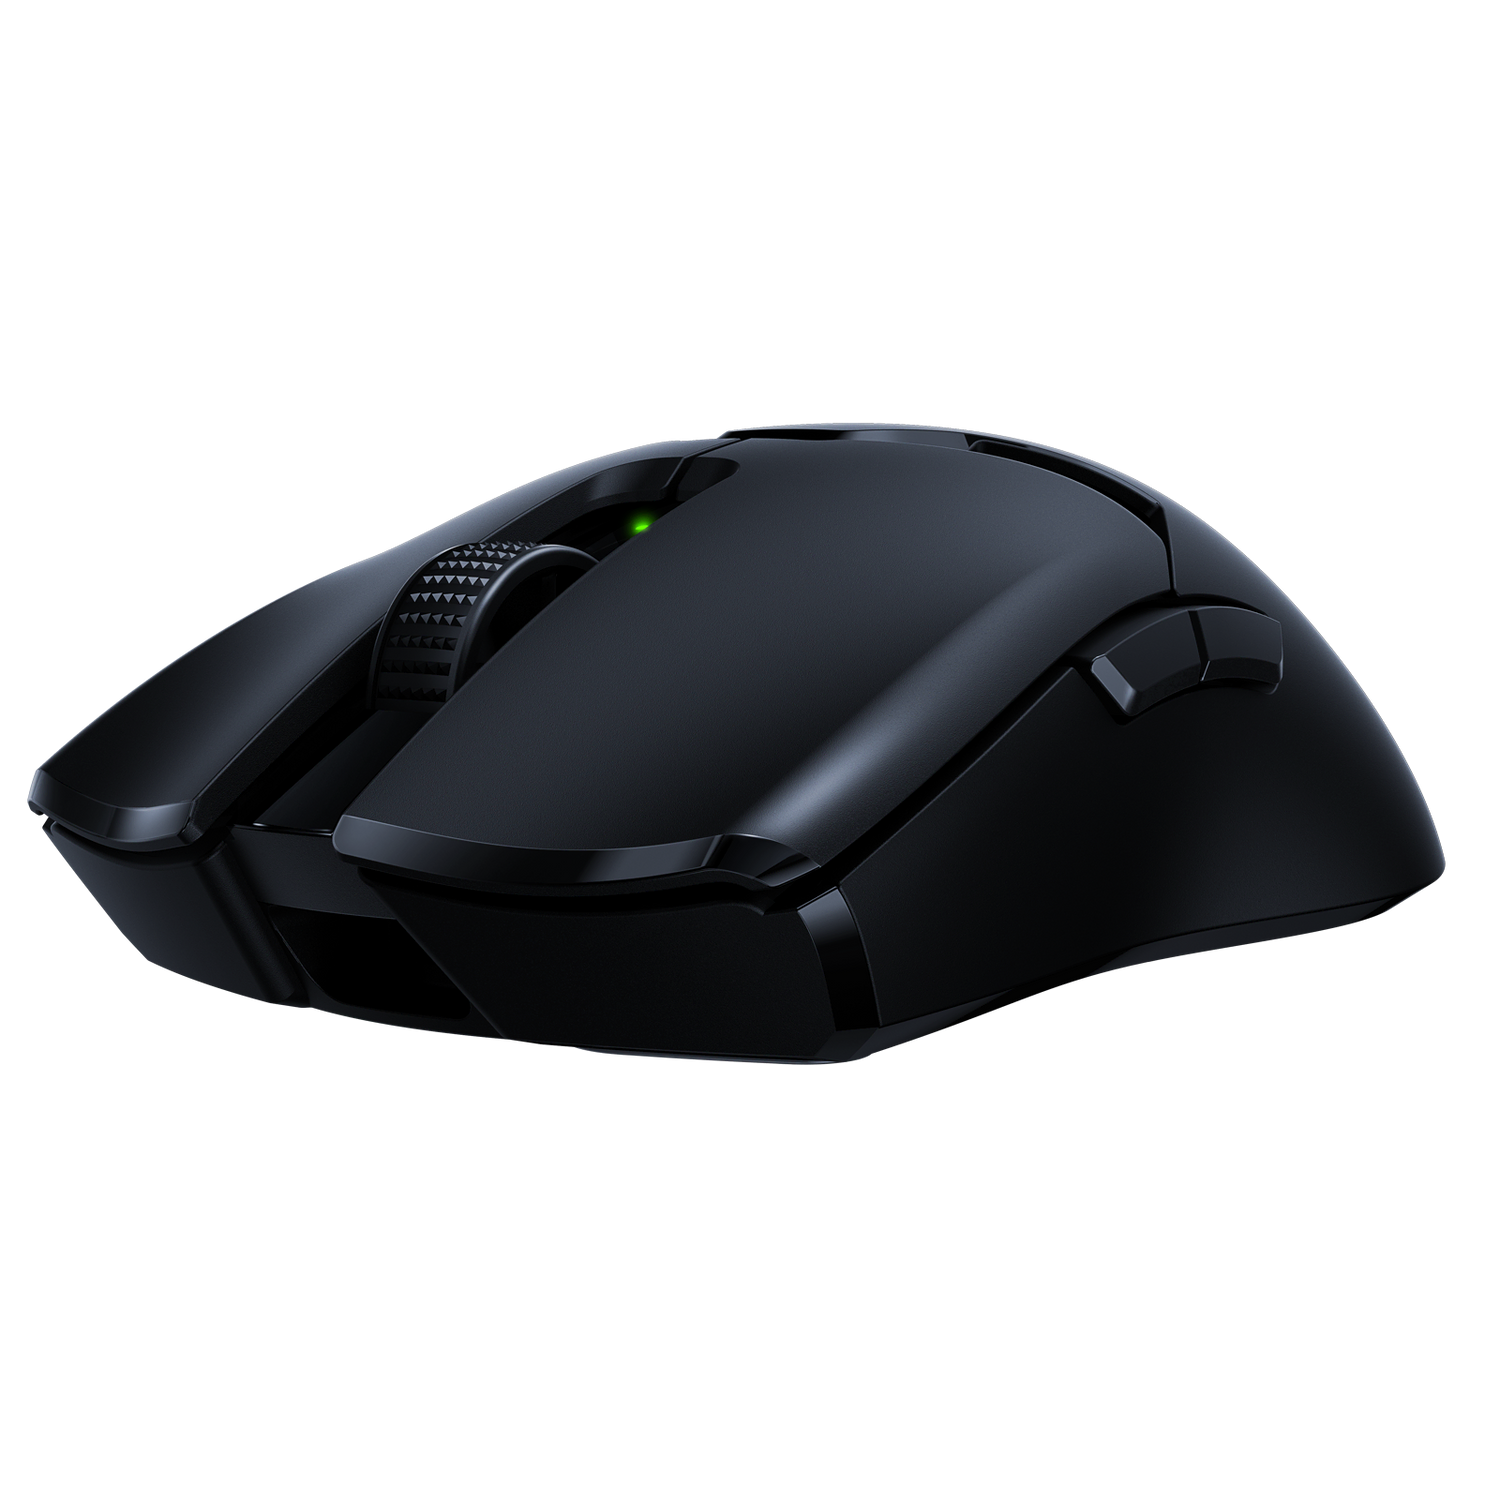 Starforge Systems - Razer Viper V2 Pro HyperSpeed Wireless Gaming Mouse - Black